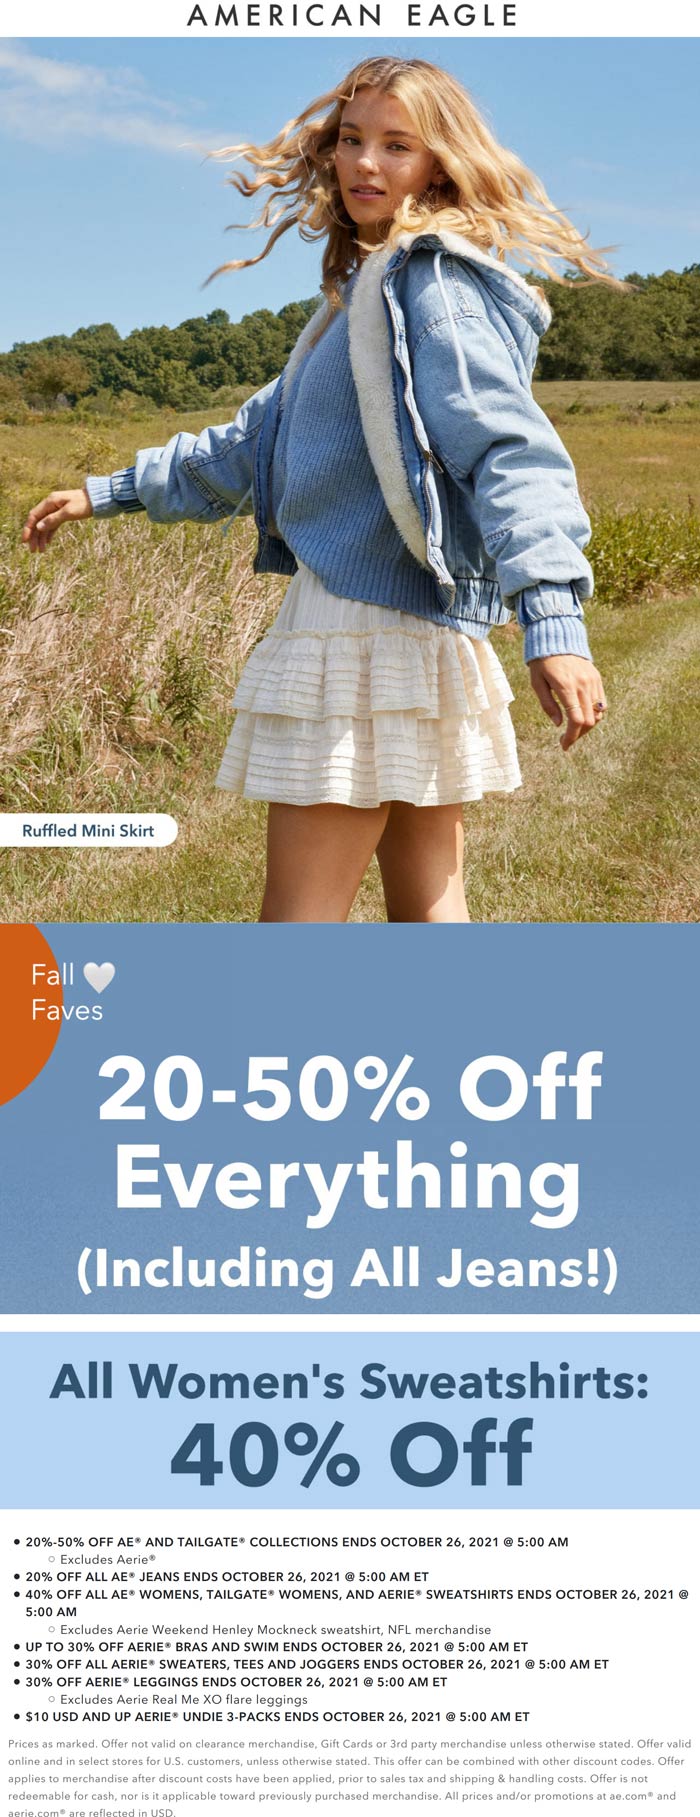 American Eagle stores Coupon  20-50% off everything at American Eagle #americaneagle 